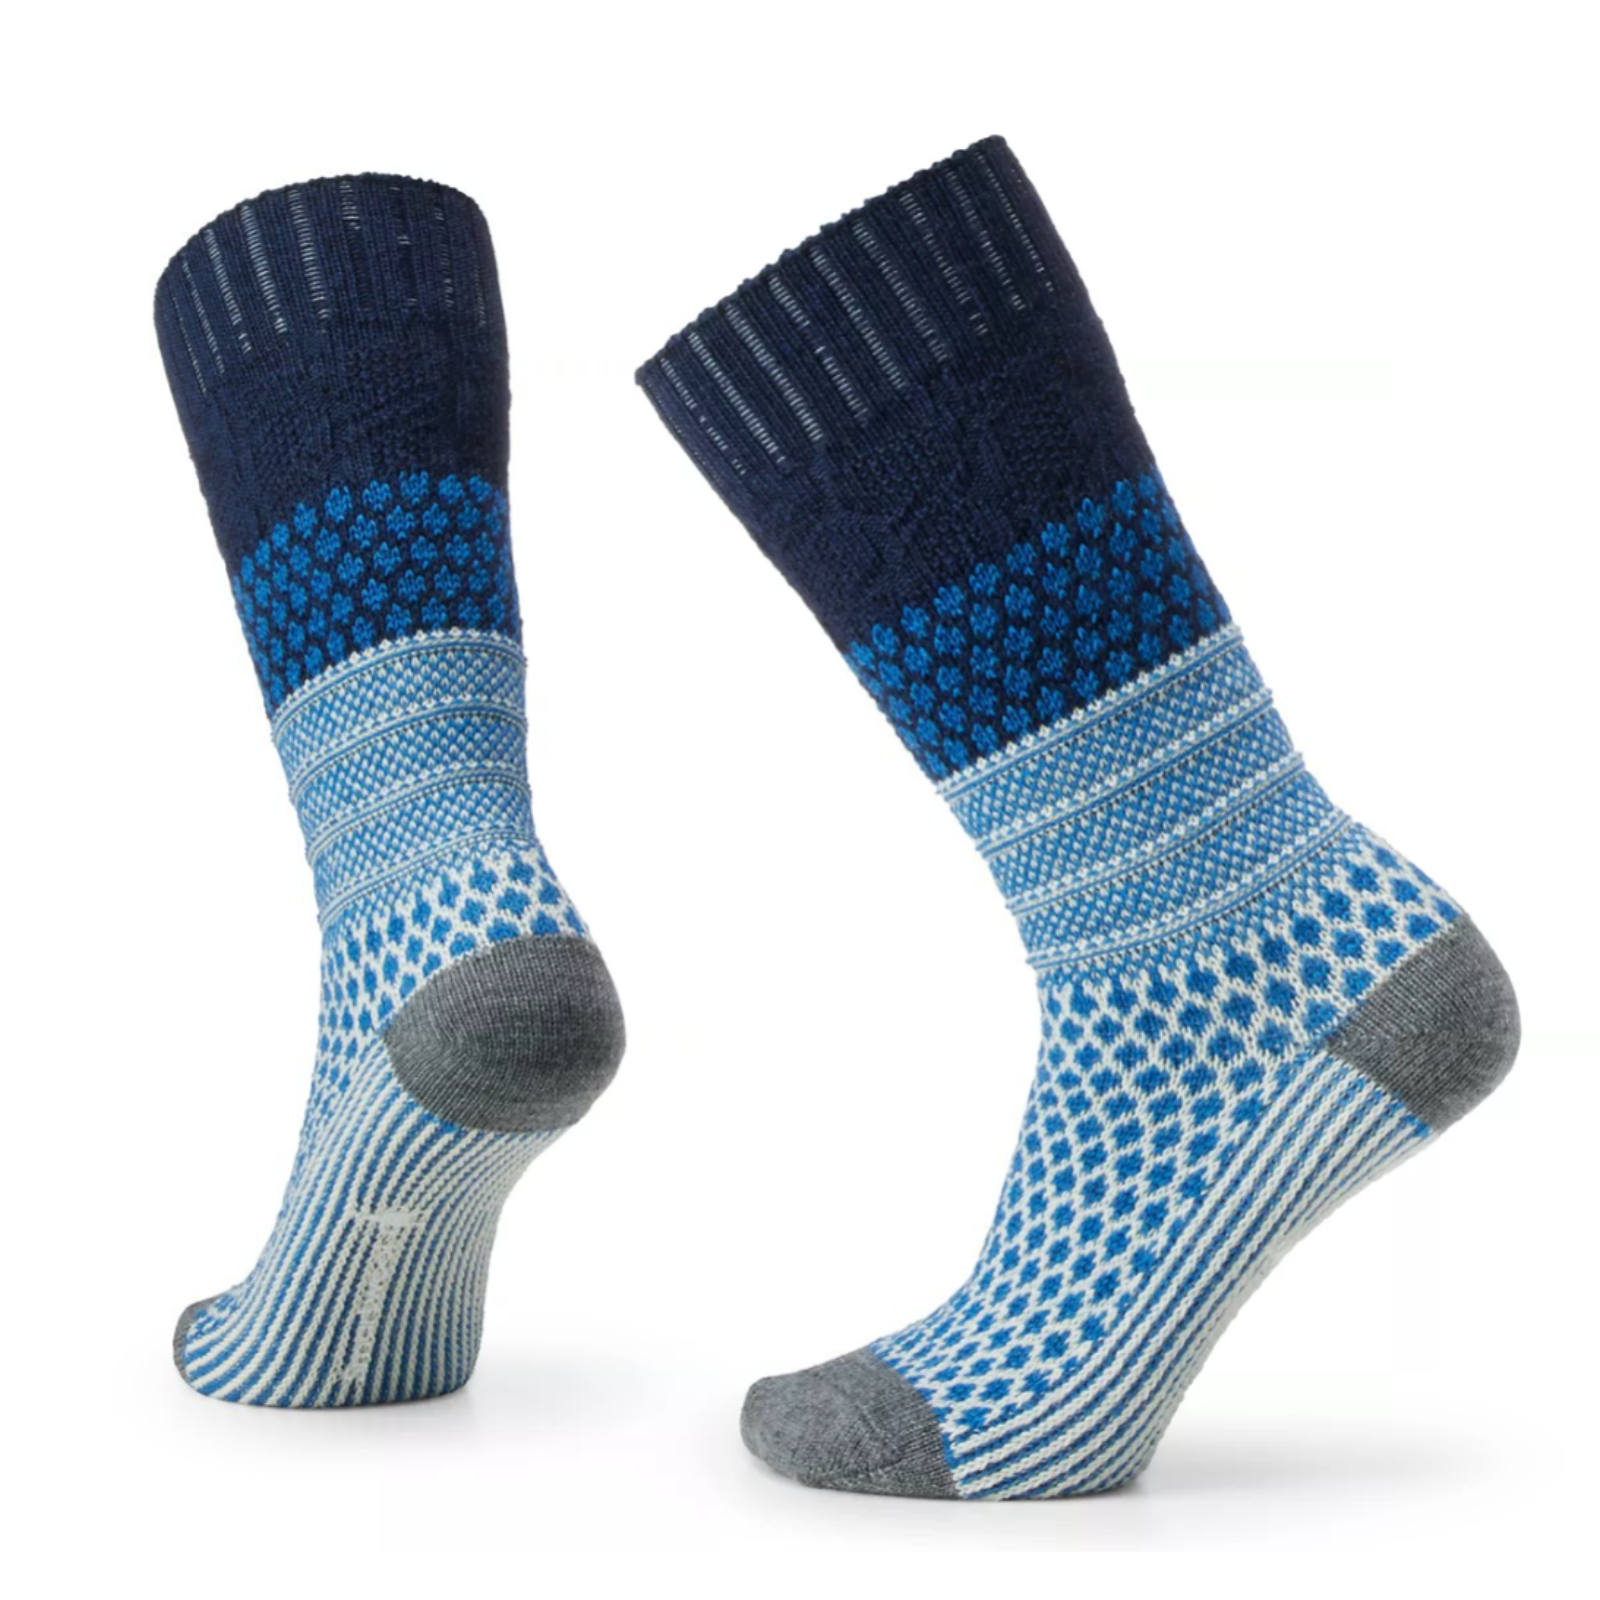 Smartwool Popcorn Cable Crew women's sock featuring navy blue colored cuff, and multiple shades of blue pattern on rest of sock, gray toe and heel. Socks on display feet. 